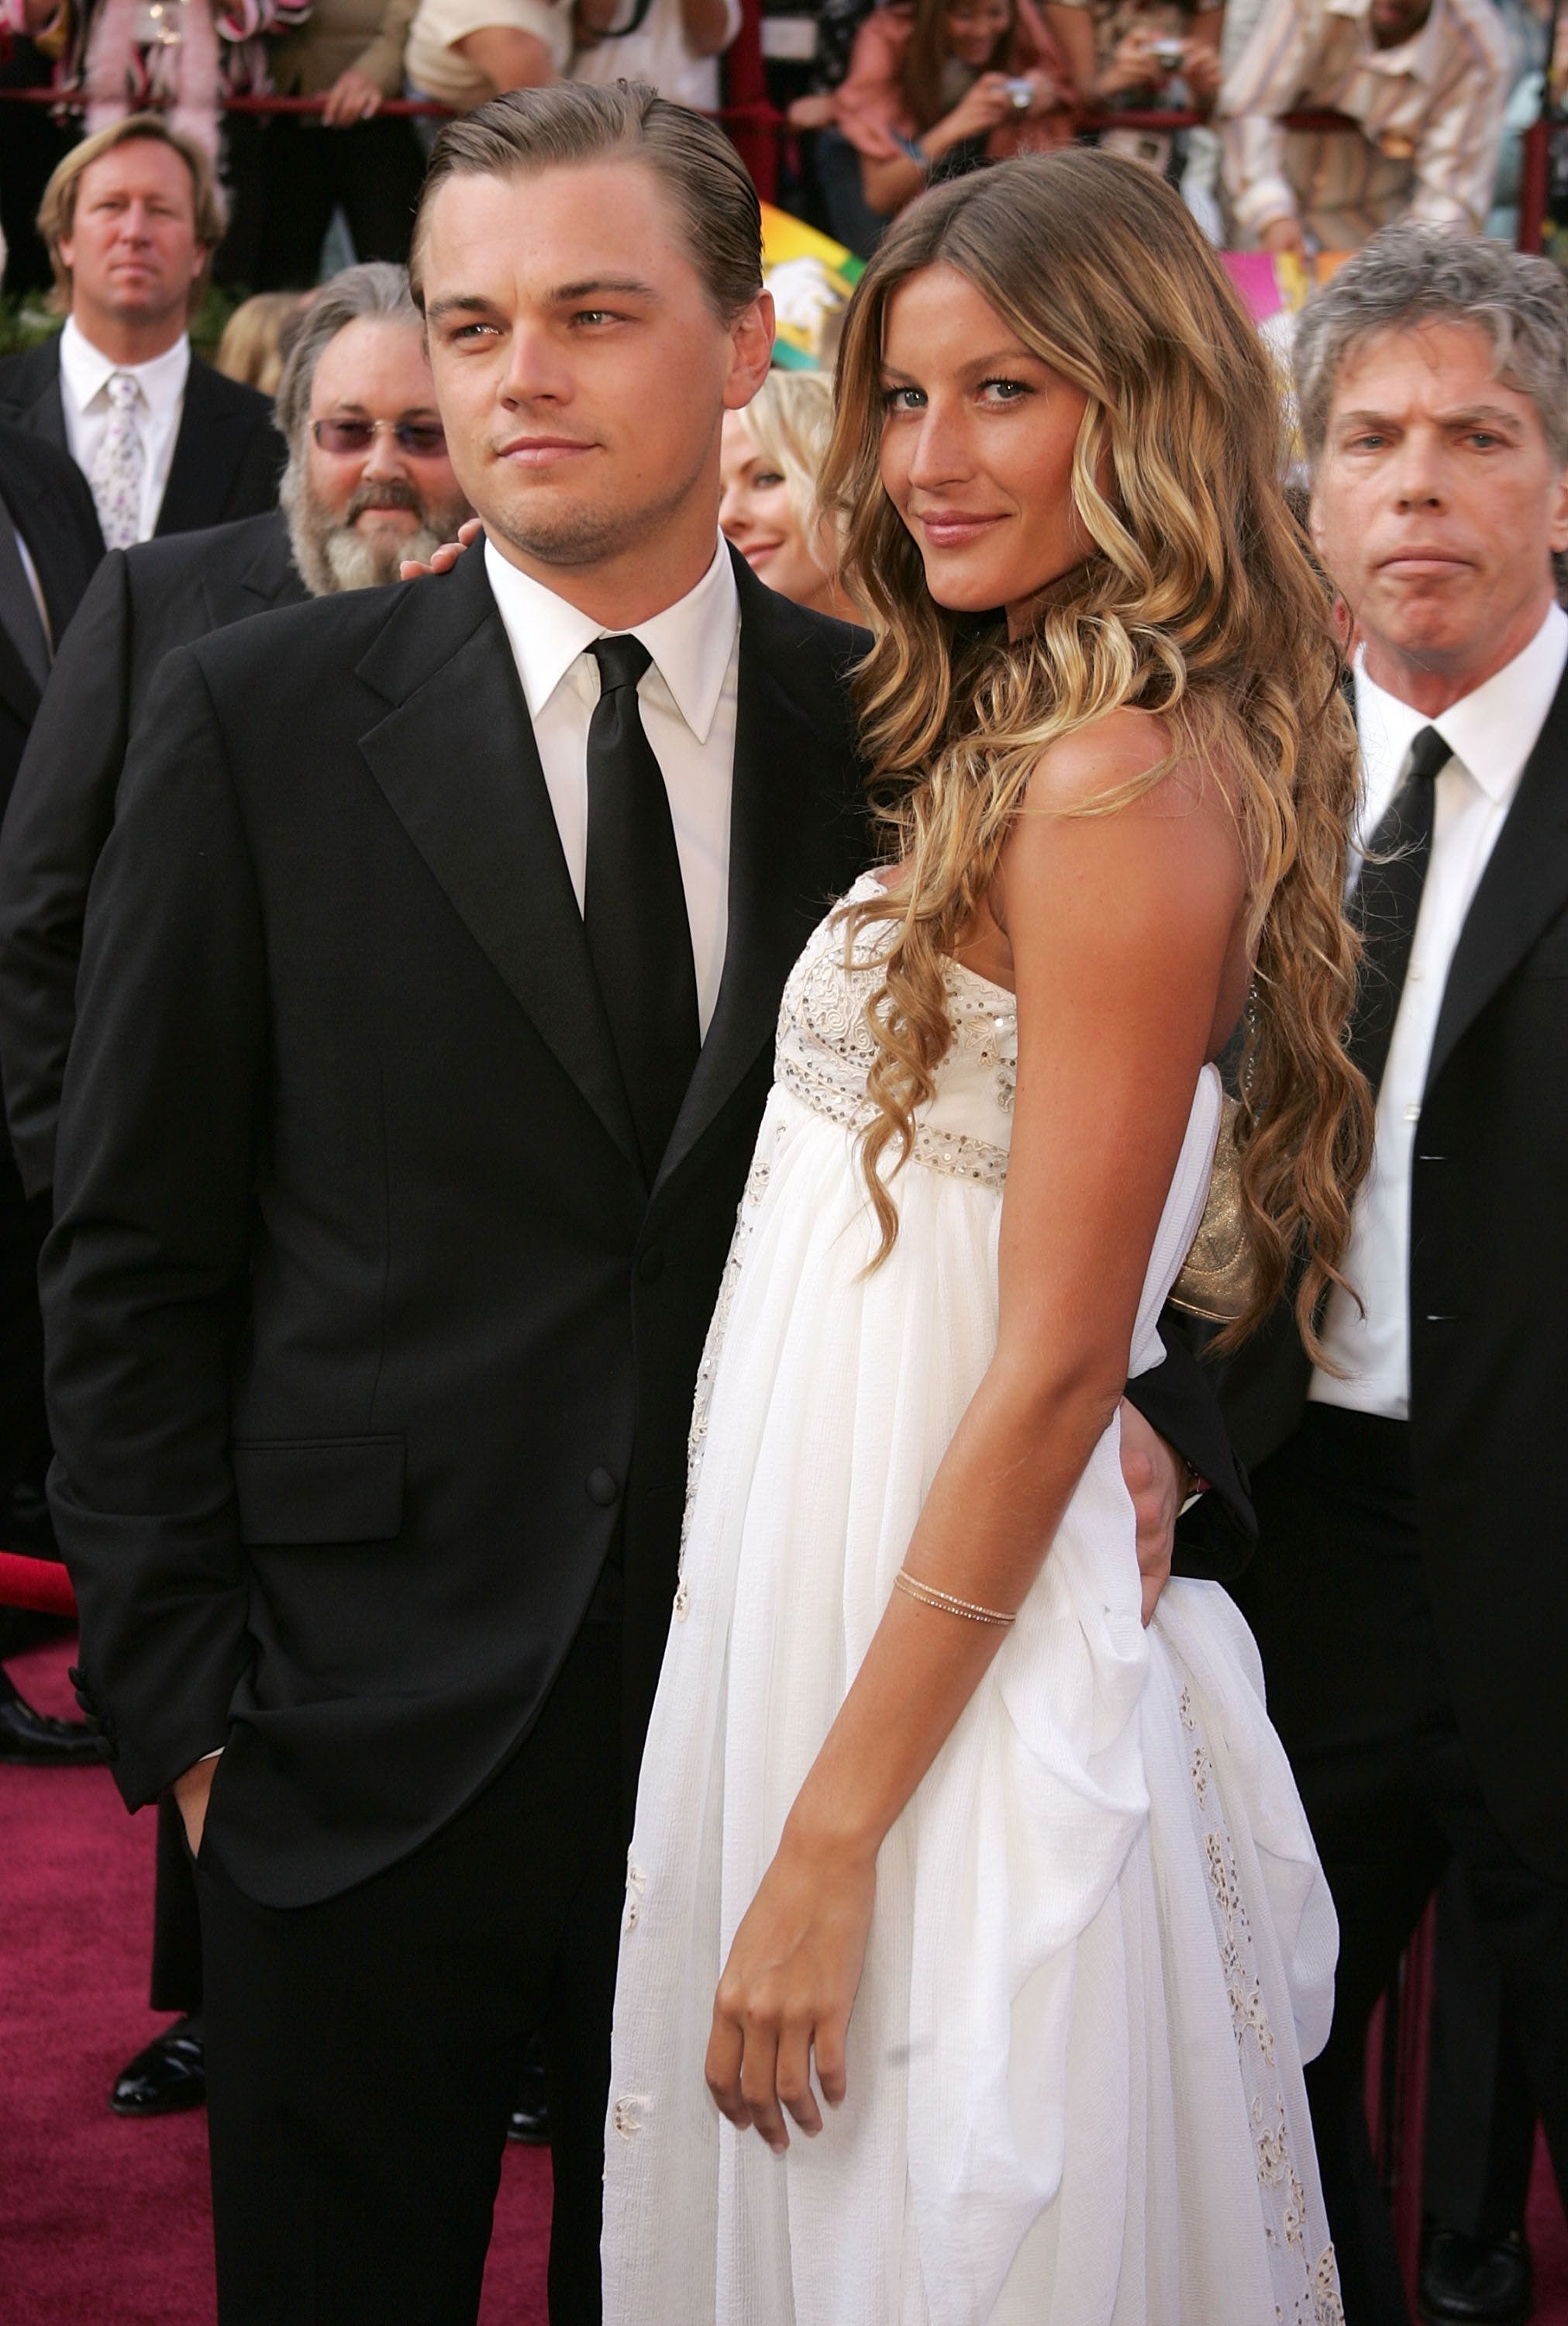 10 Forgotten Celebrity Couples Of The 2000s